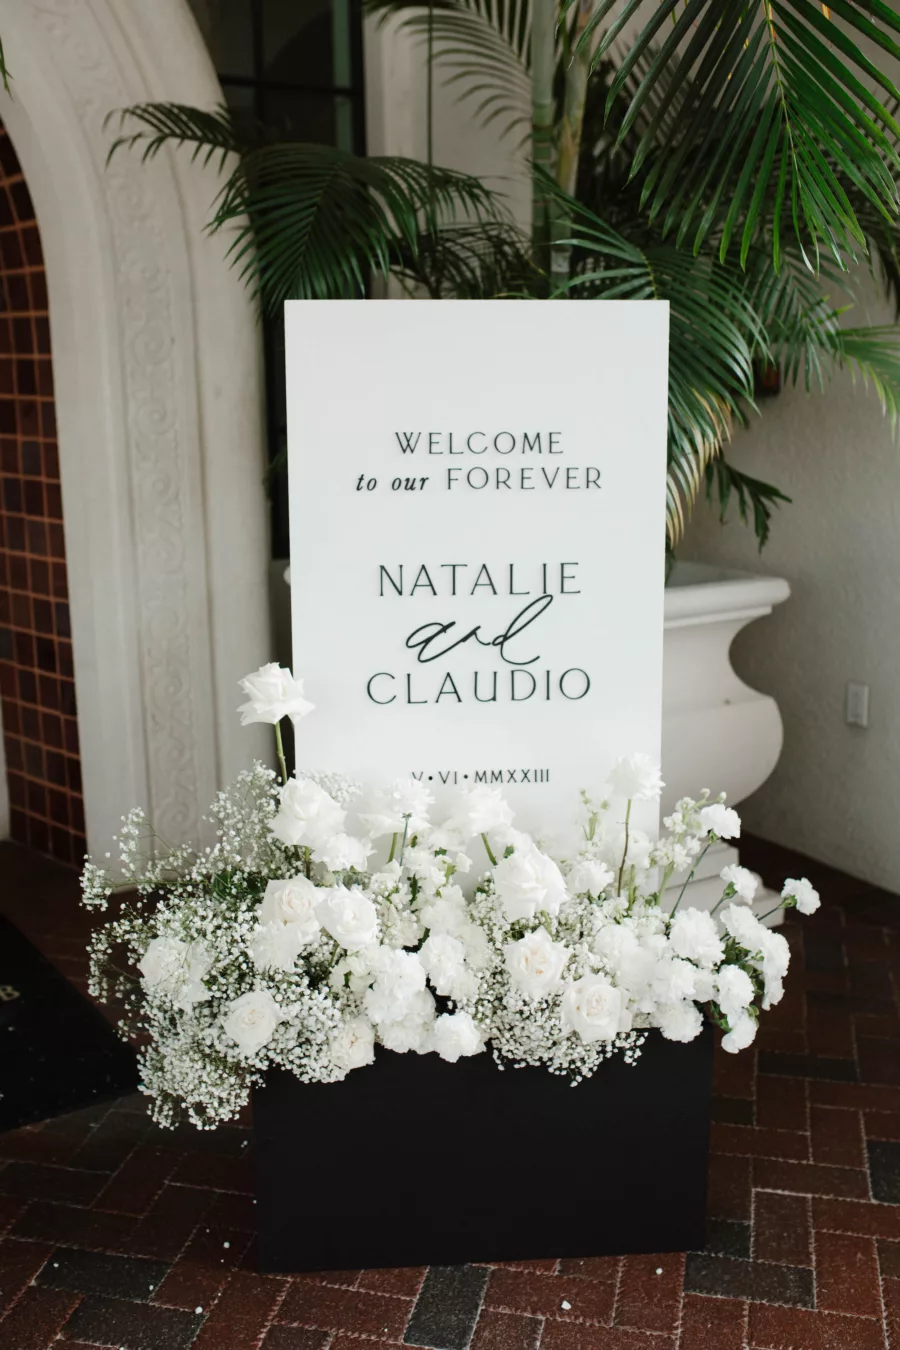 Modern White Welcome To Our Forever Ceremony Wedding Sign with Black Flower Box Inspiration | White Roses, Carnations, and Baby's Breath Floral Arrangement Ideas